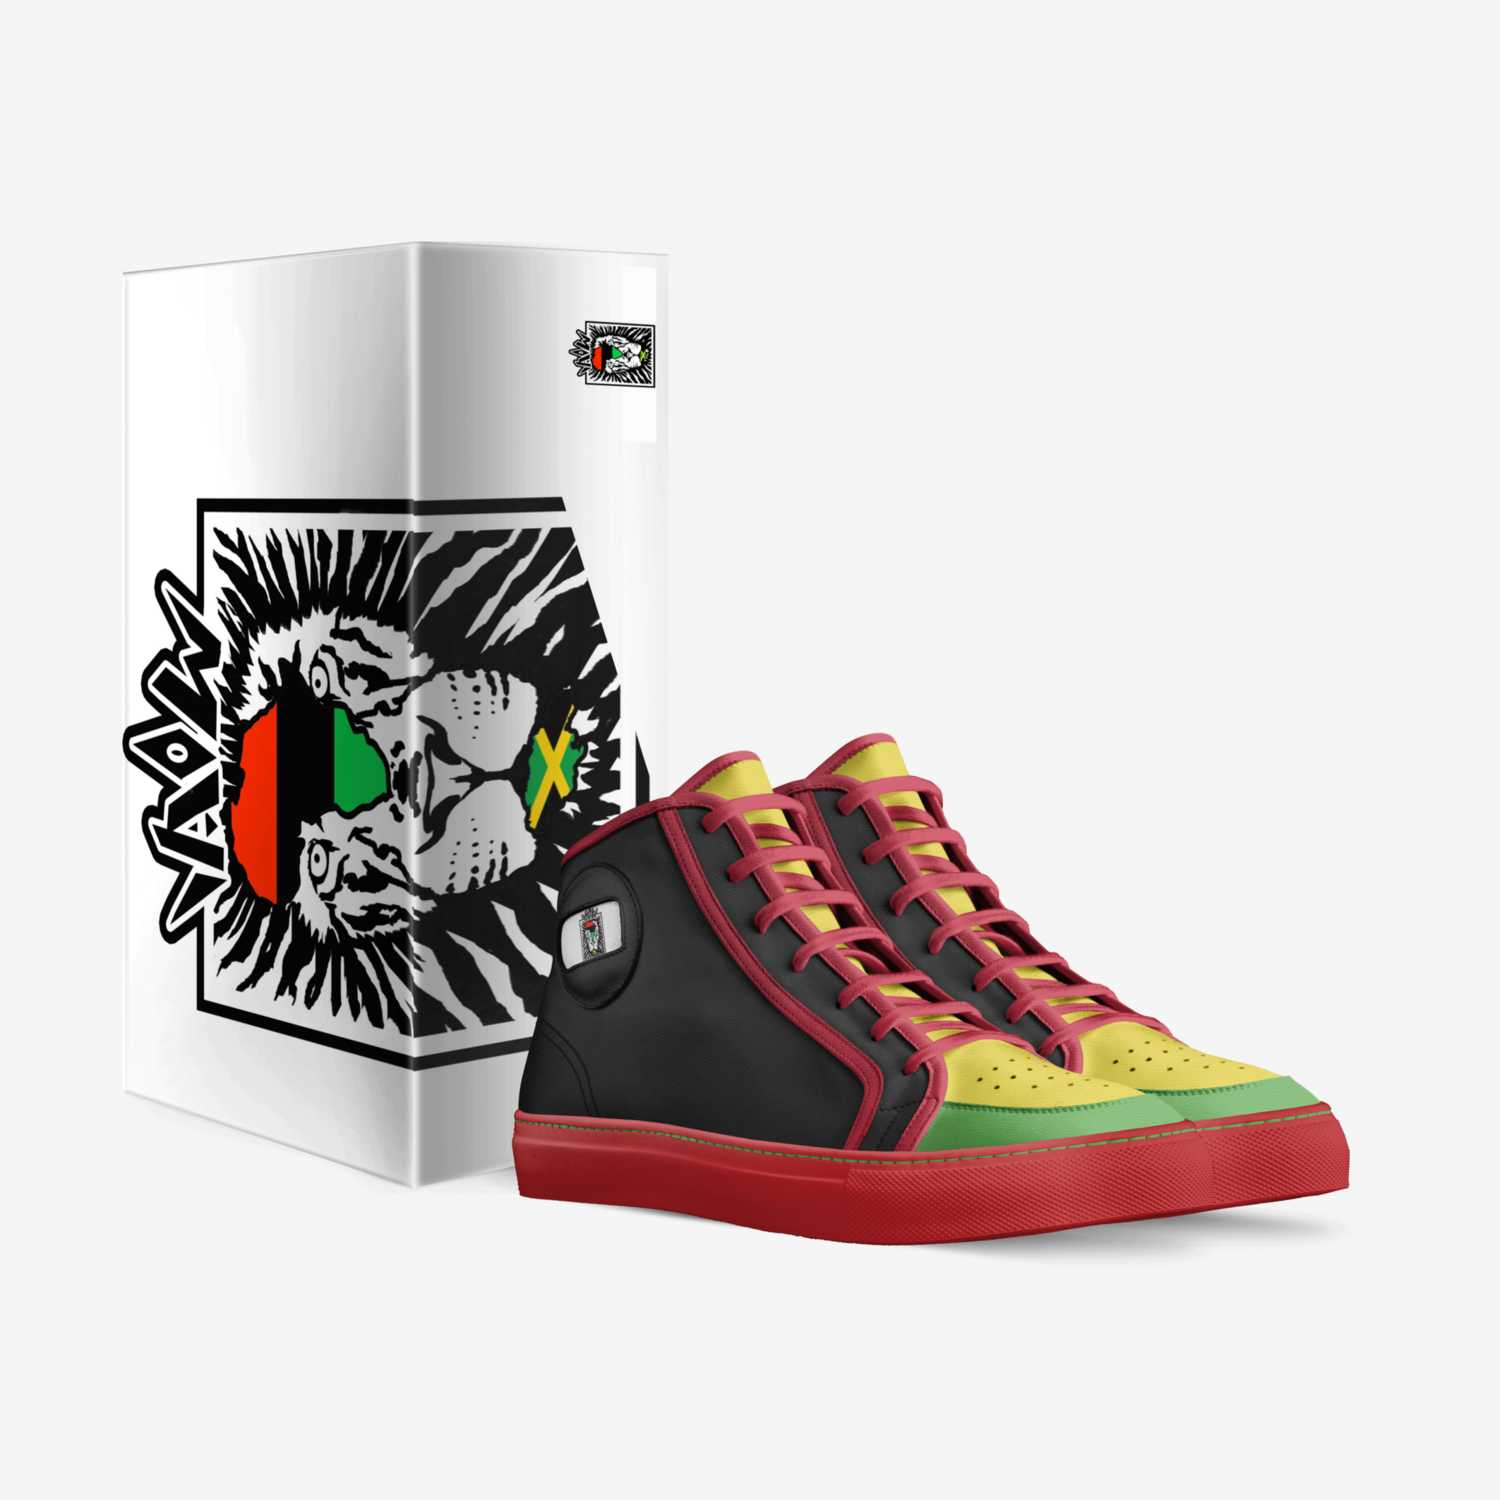 ADUBS RASTA custom made in Italy shoes by Adrian Willis | Box view